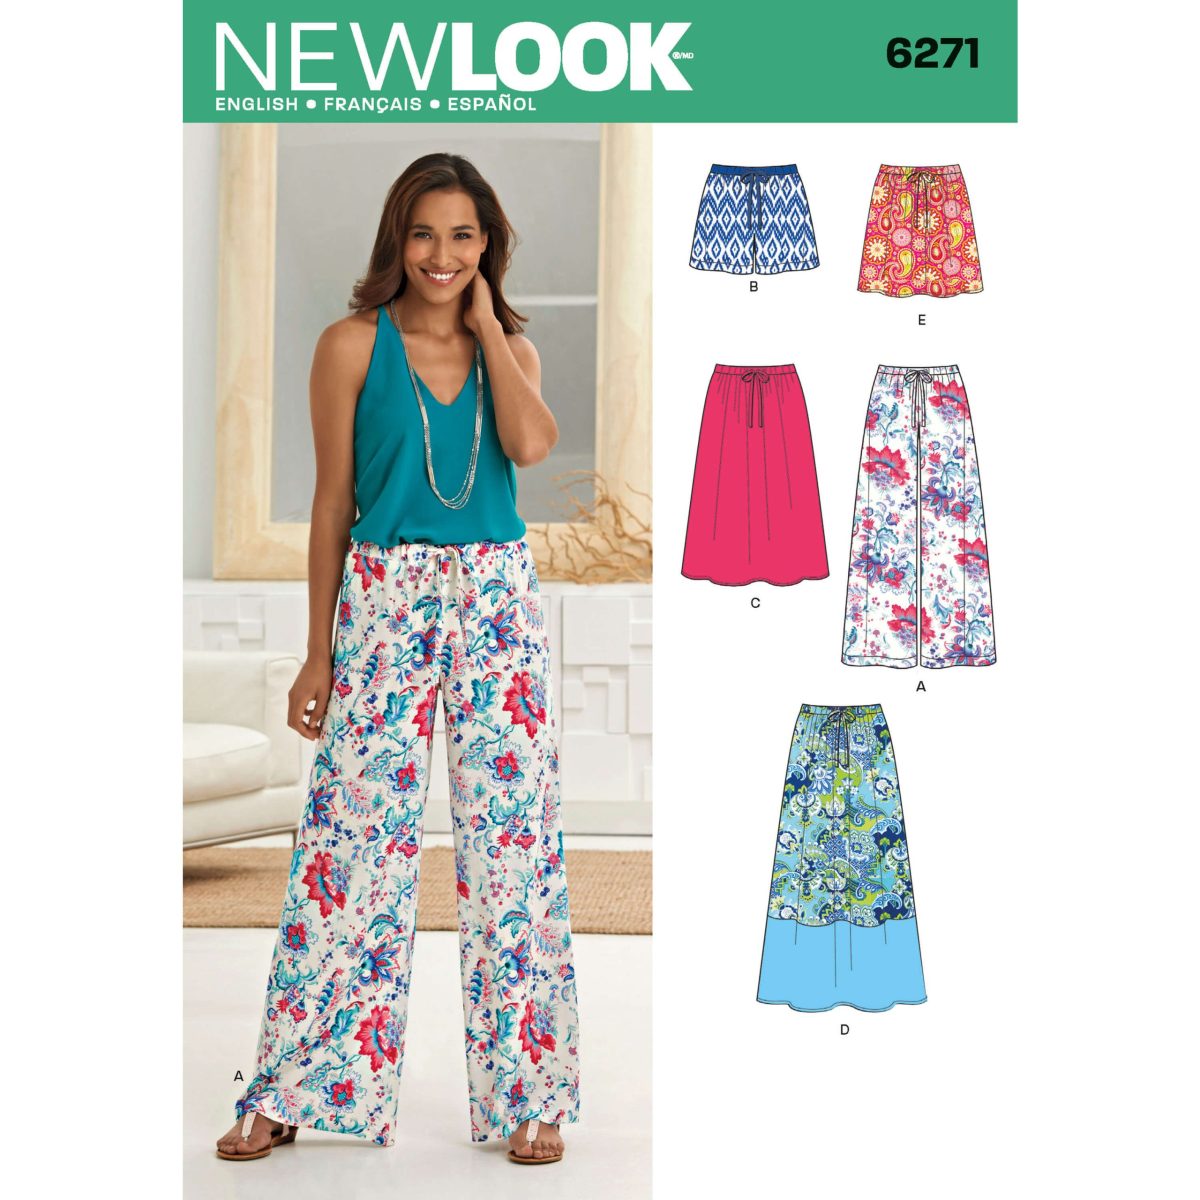 New Look Sewing Pattern N6271 Misses' Skirt in Three Lengths and Trousers or Shorts